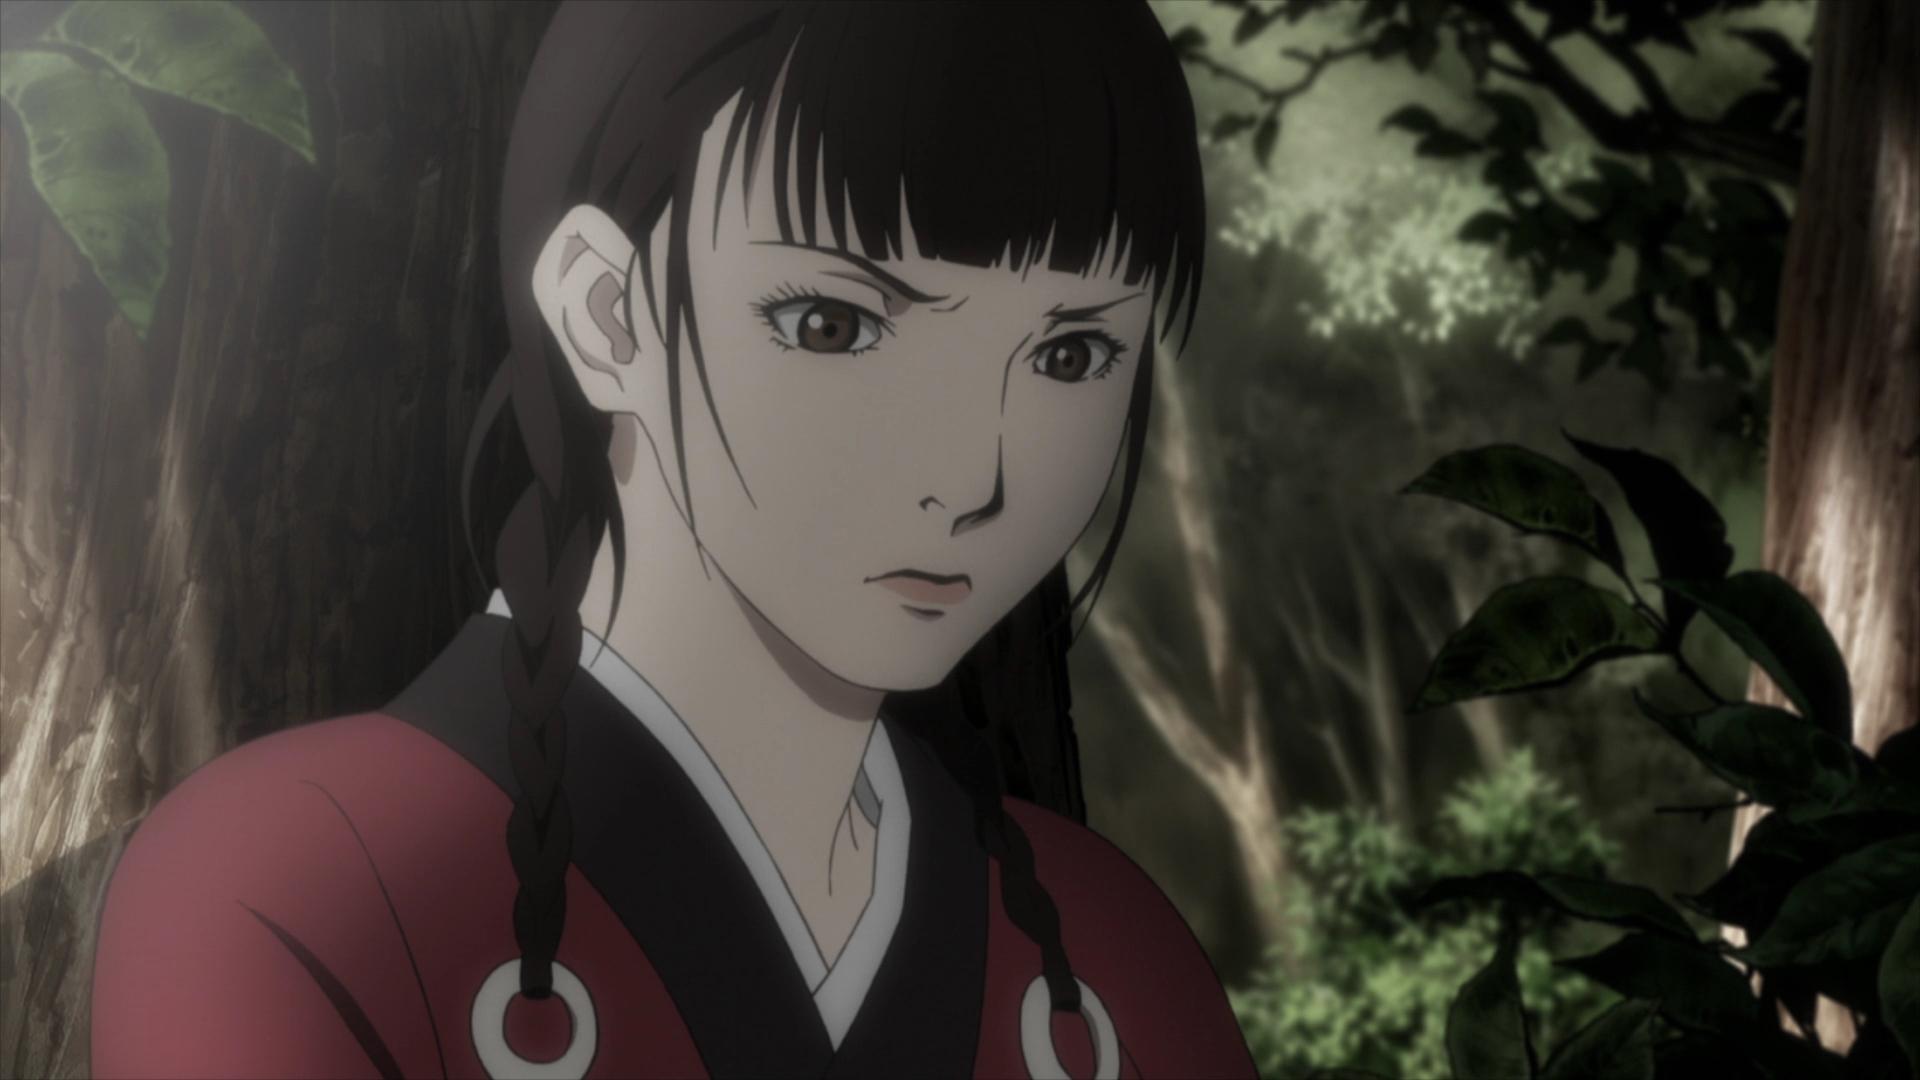 Blade of the Immortal Episode 4: Rin at Odds